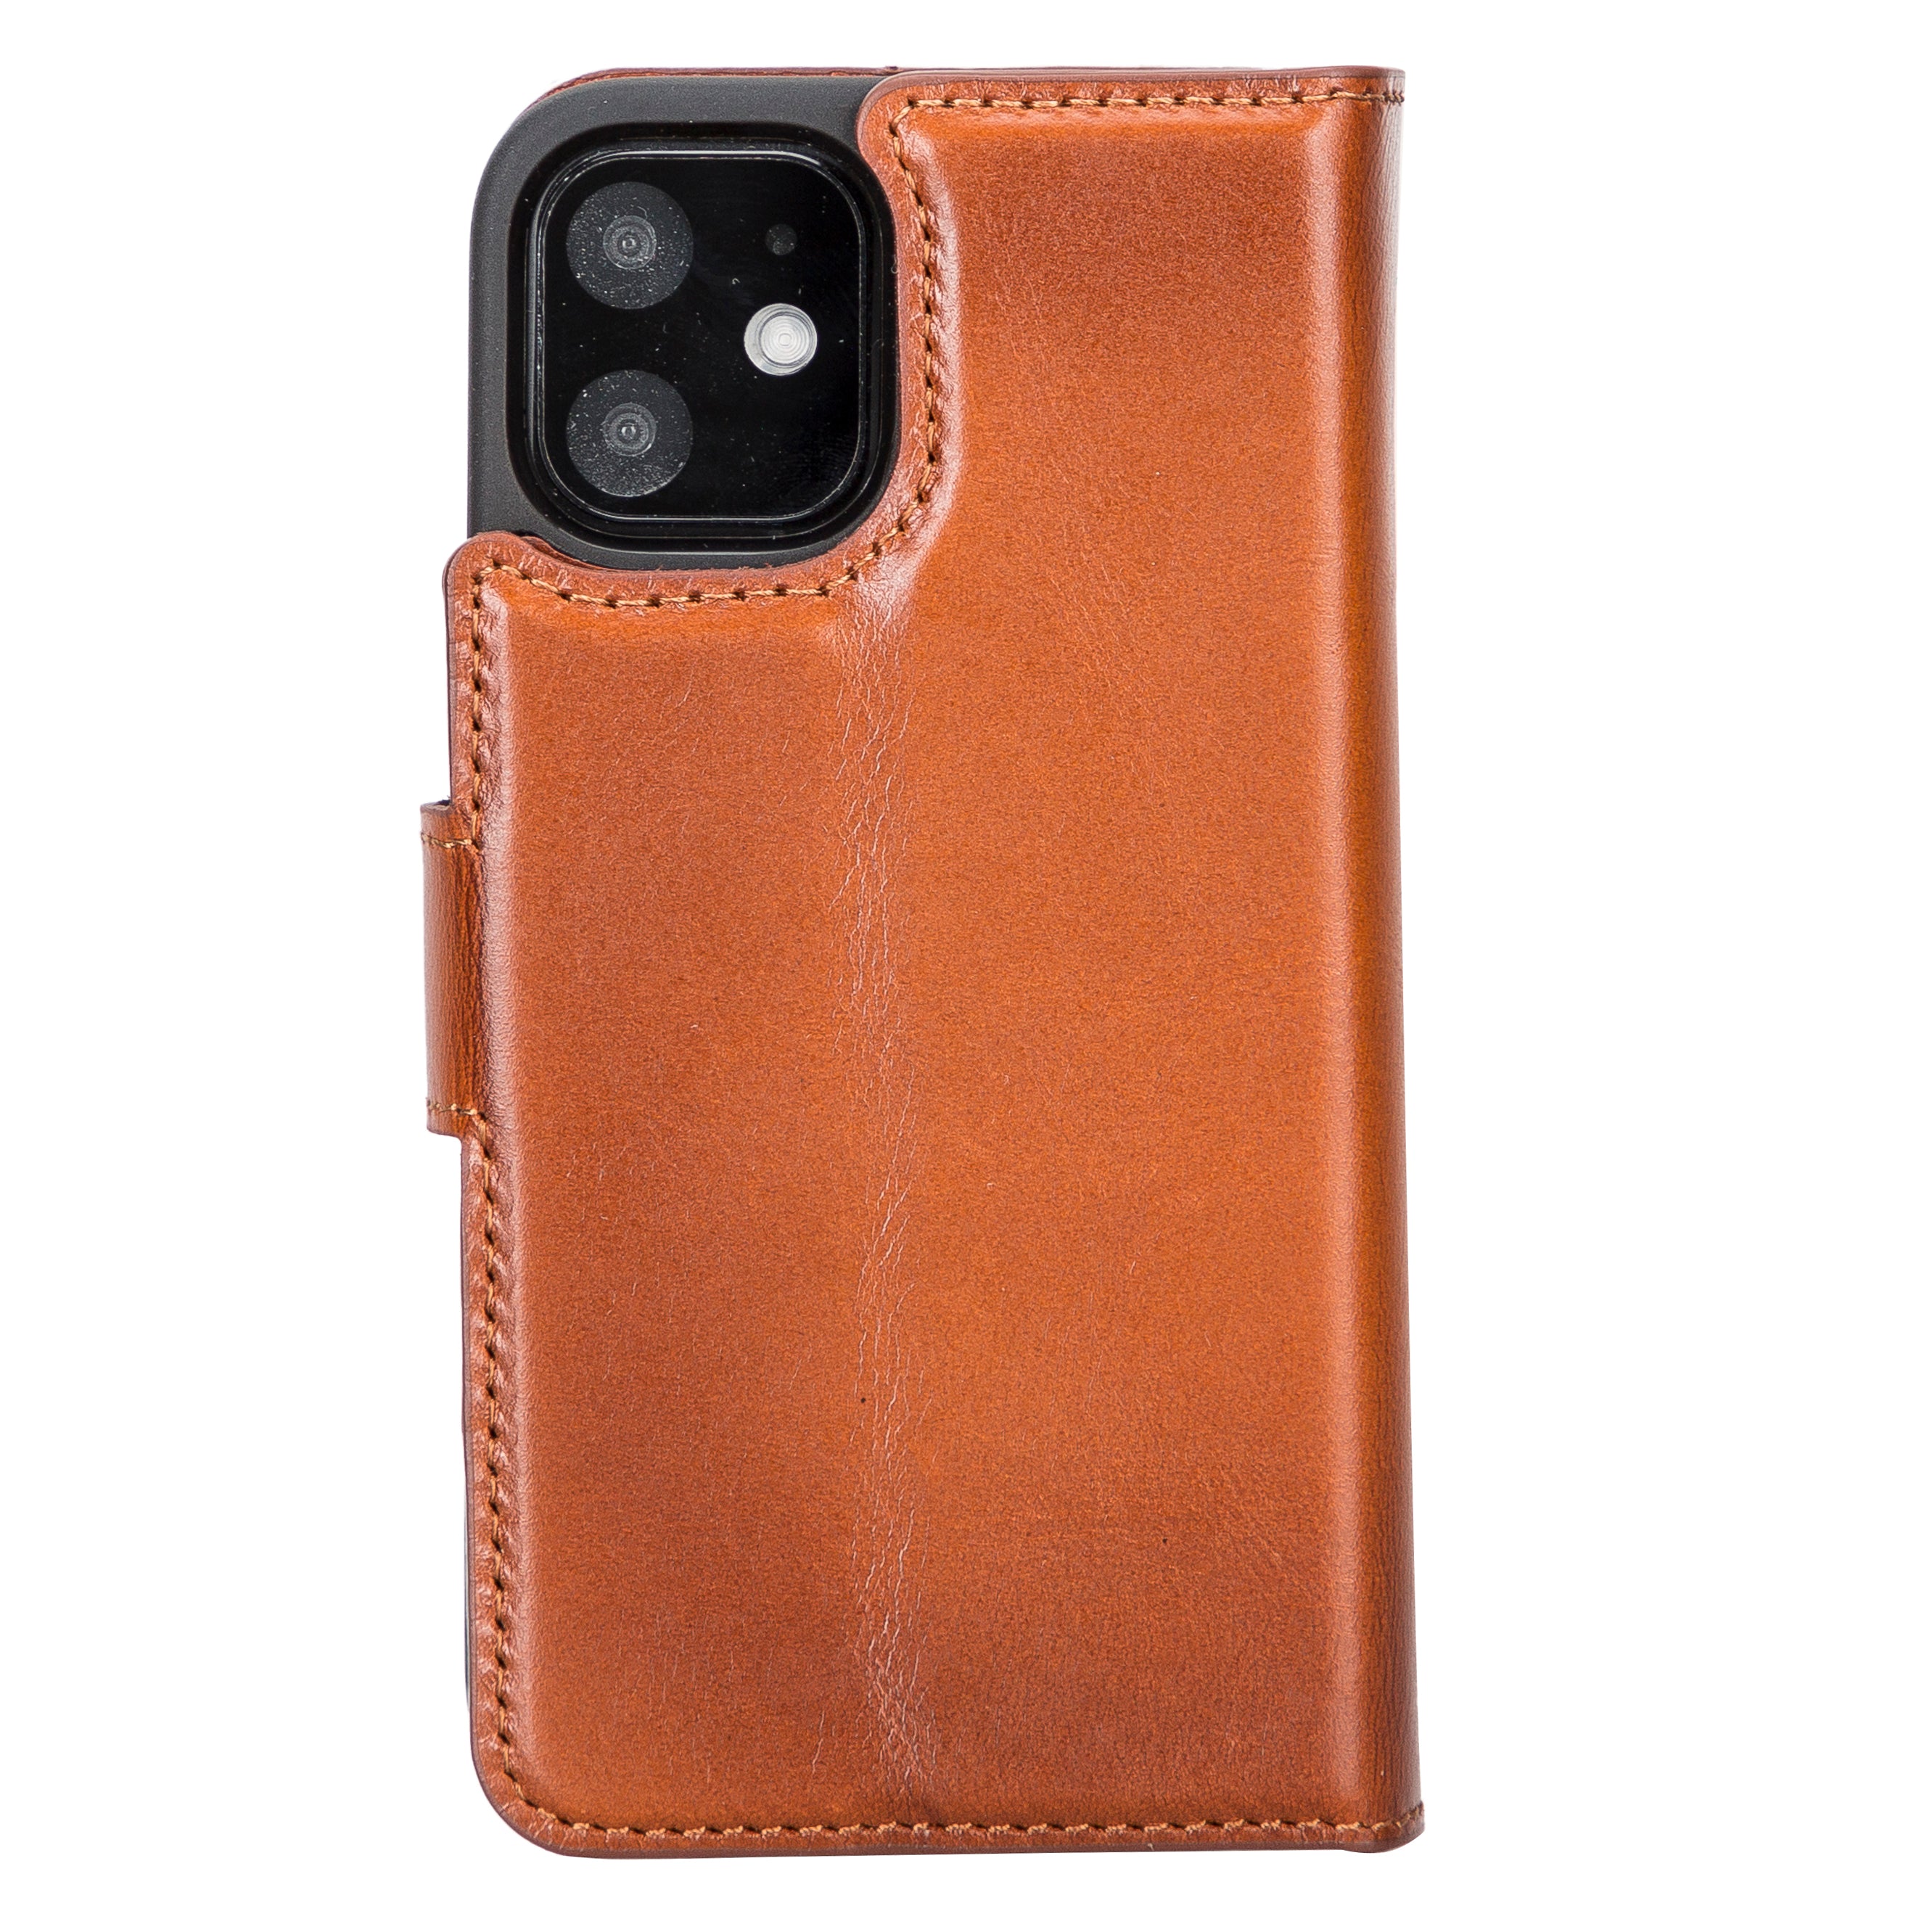 DelfiCase Leather Magnetic Detachable Wallet Case for iPhone 12 Mini (5.4") 26